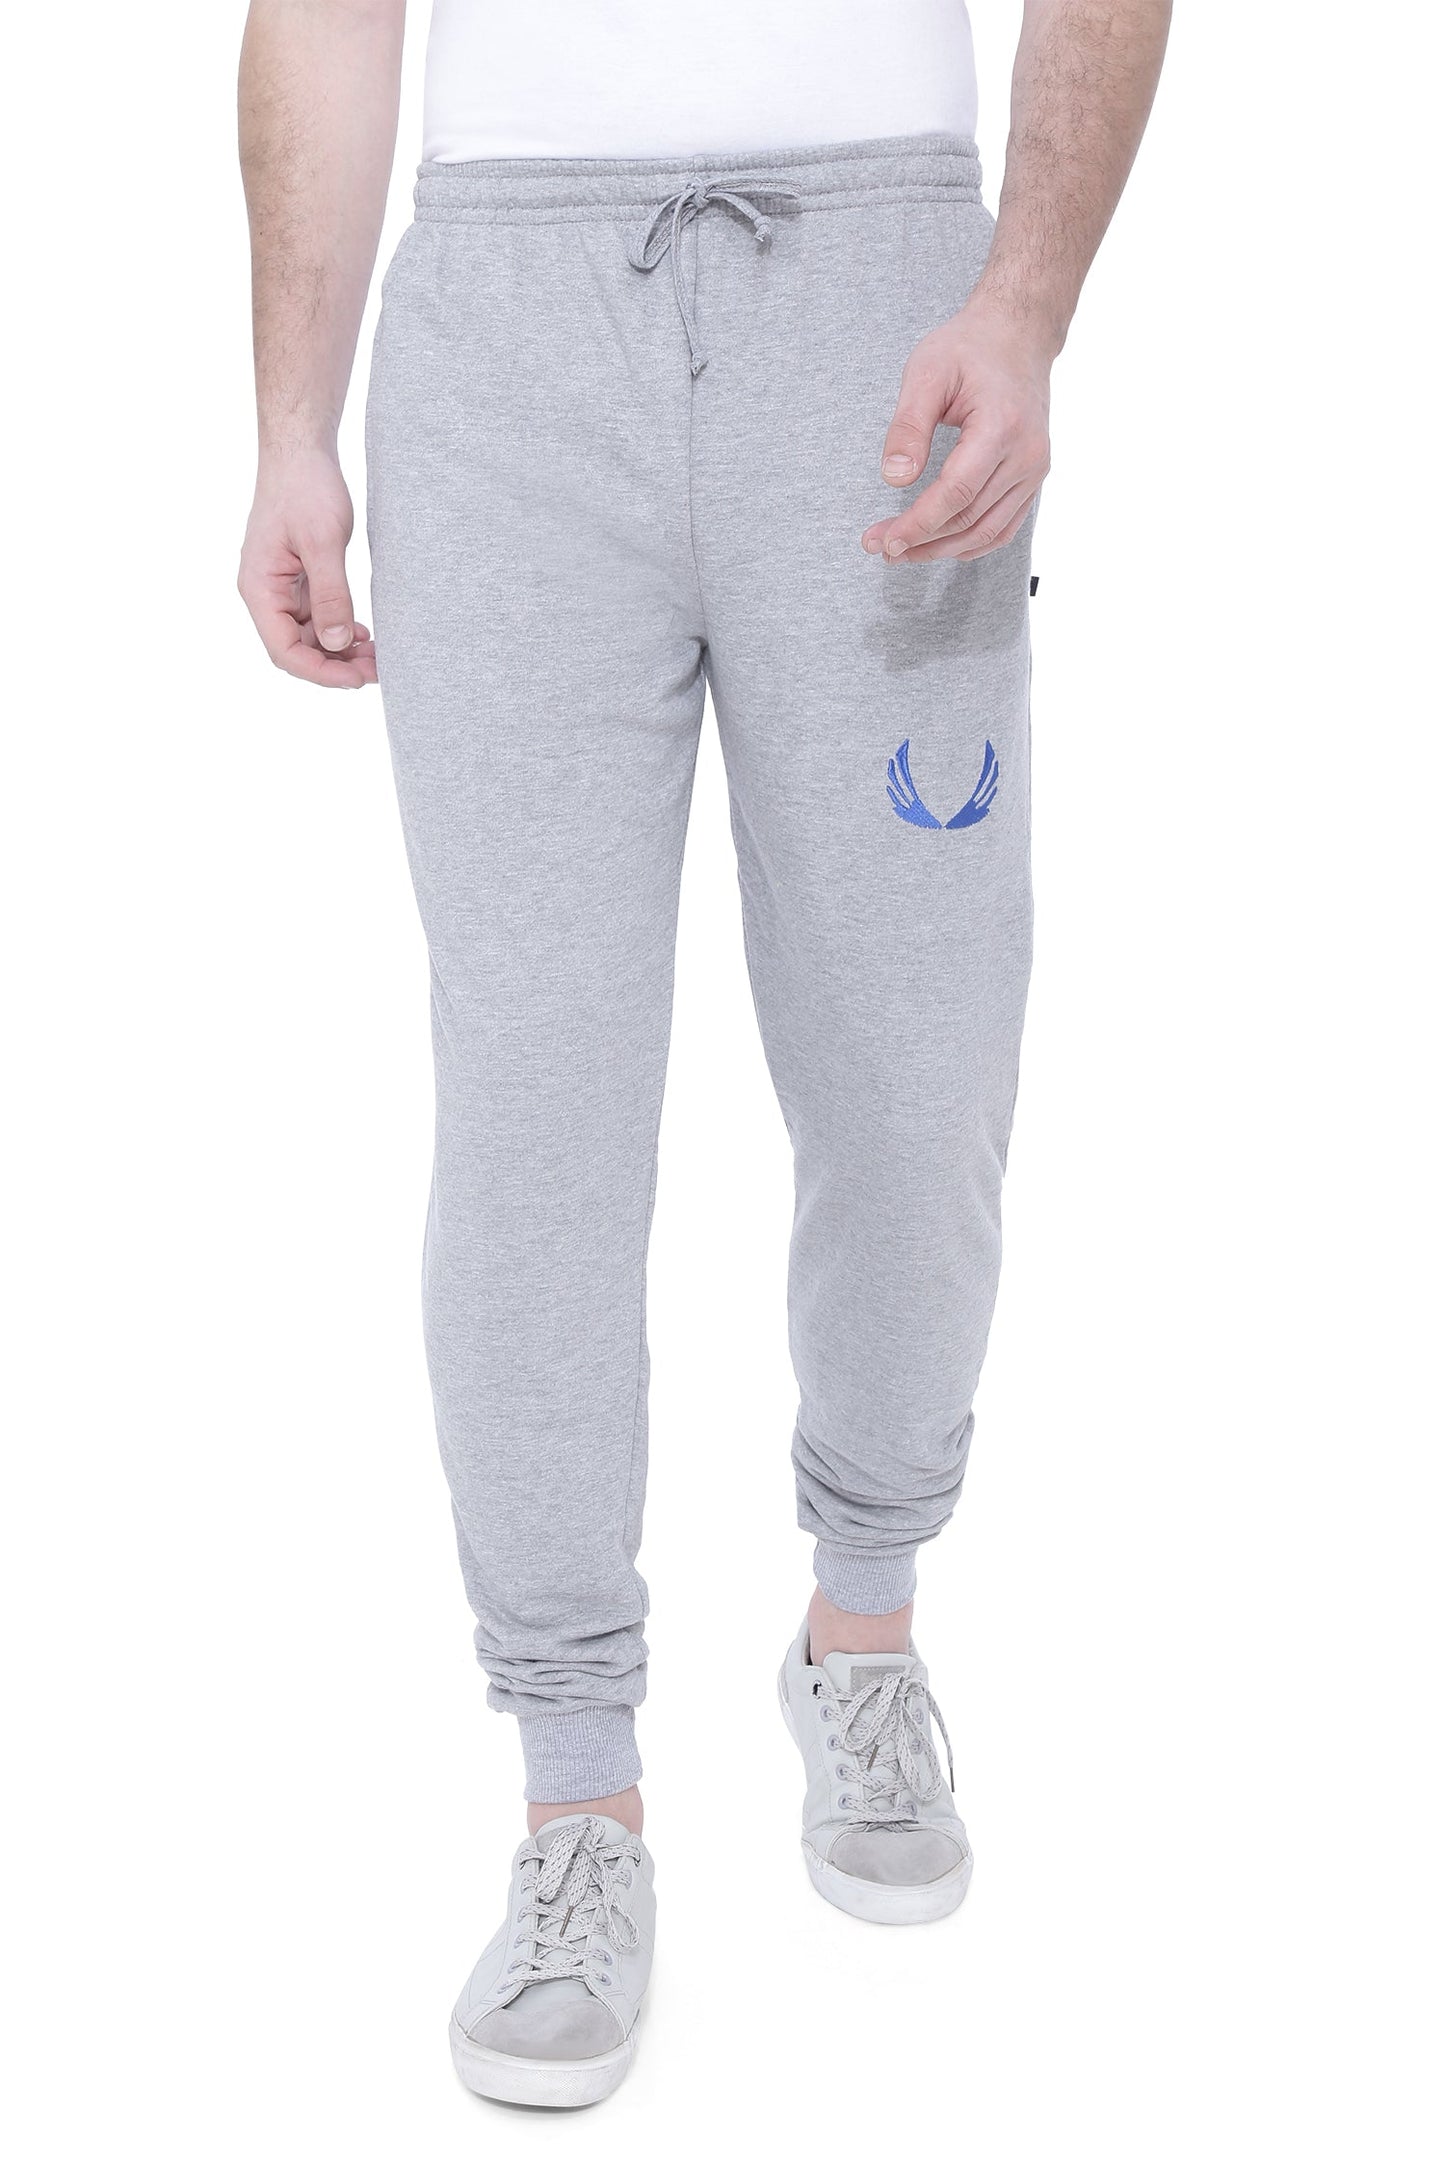 Neo Garments Men's Cotton Sweatpants - Grey | SIZES FROM M TO 7XL.